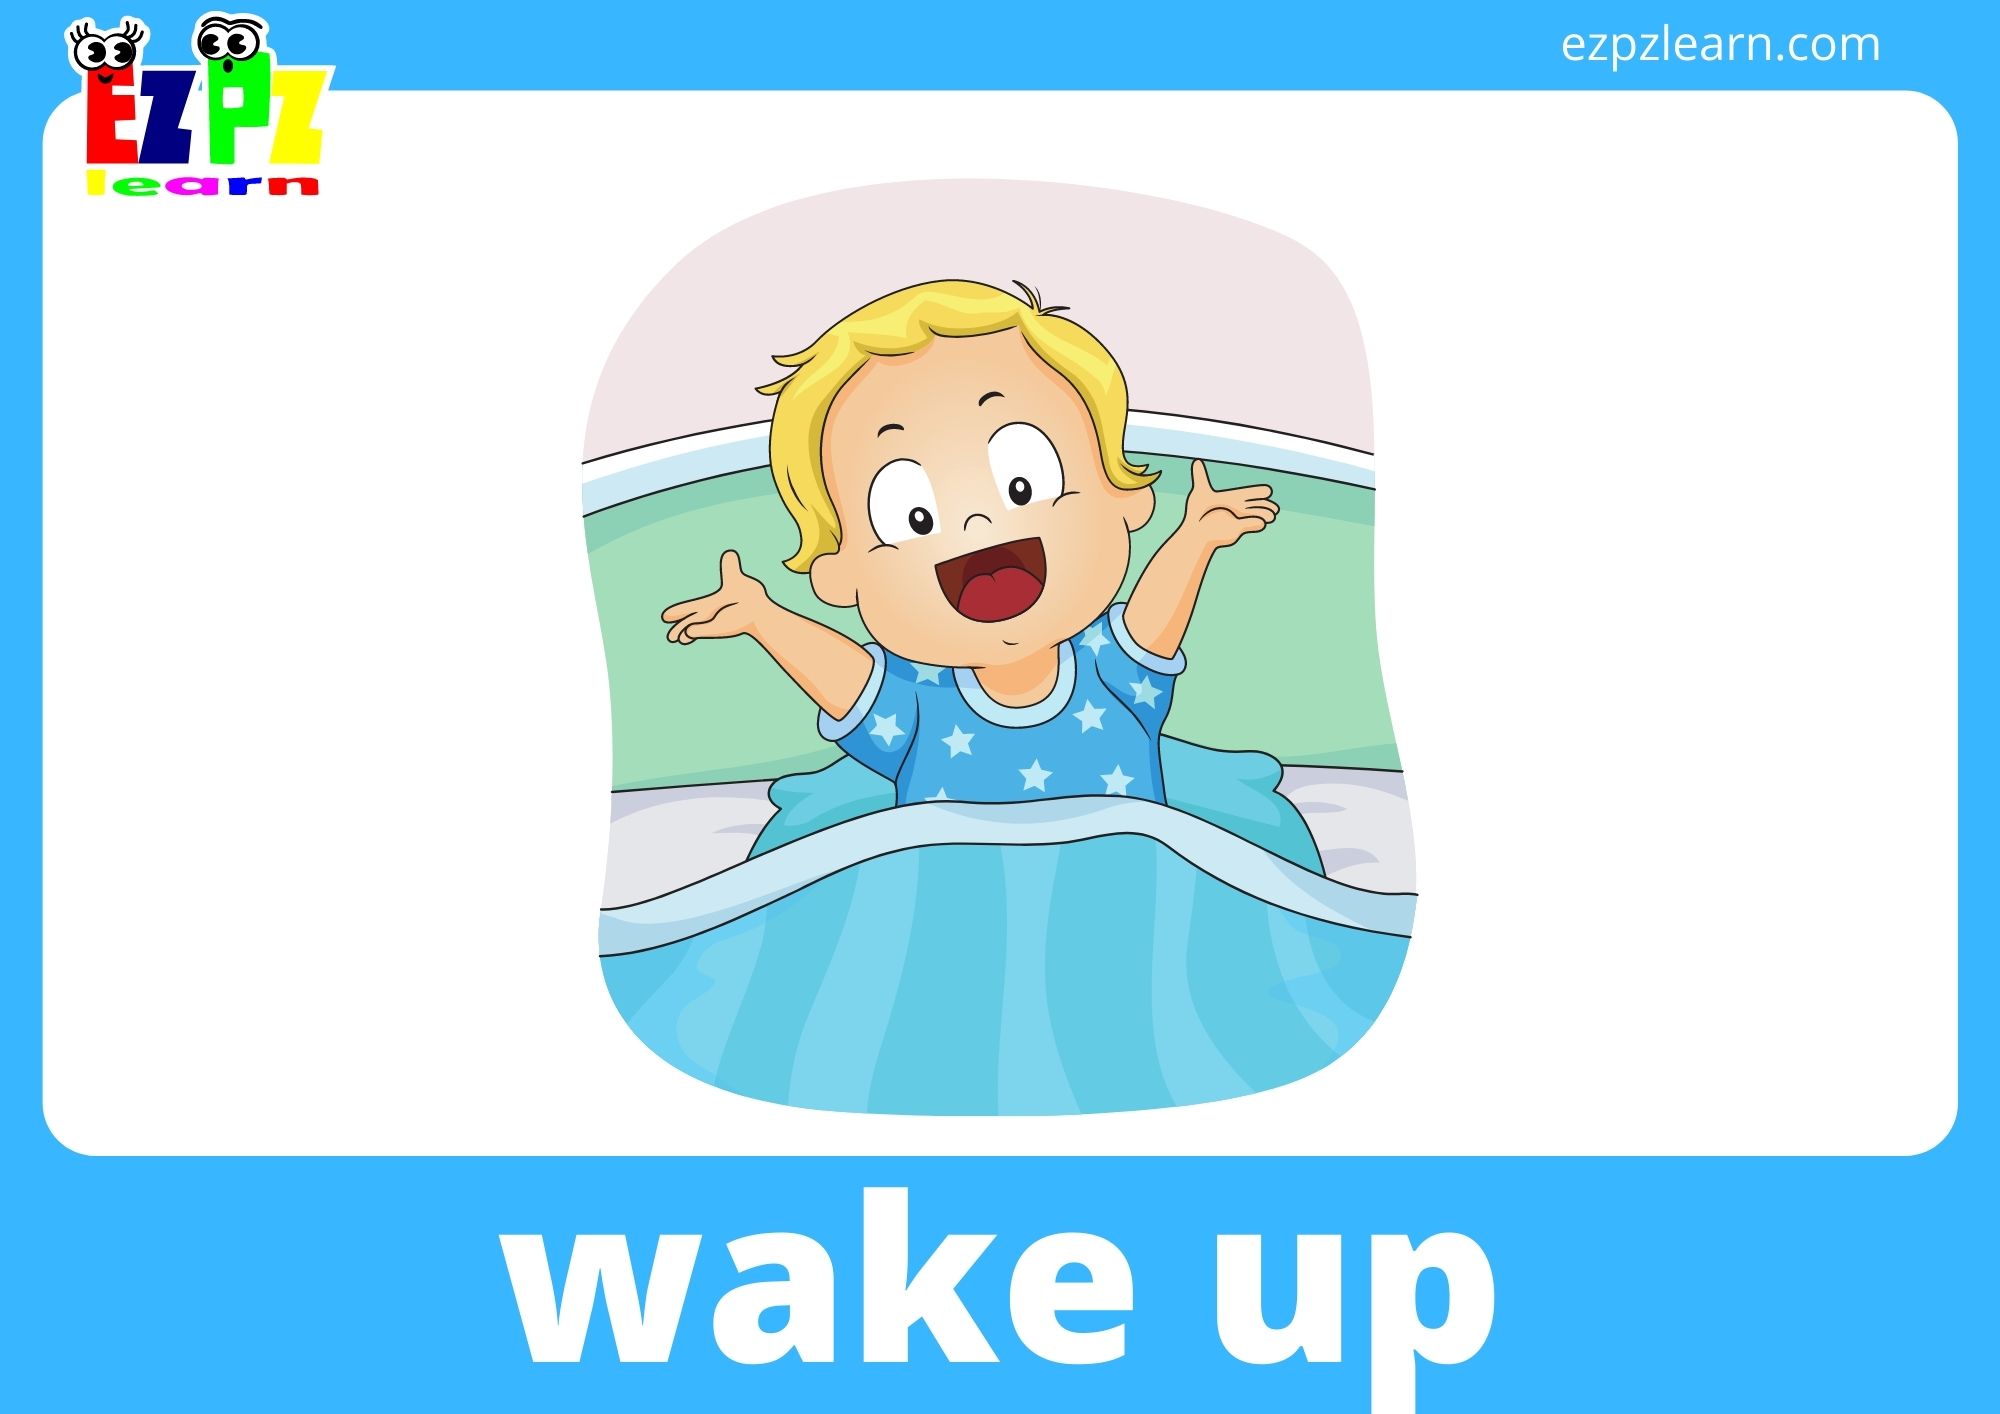 daily-routine-flashcards-with-words-ezpzlearn